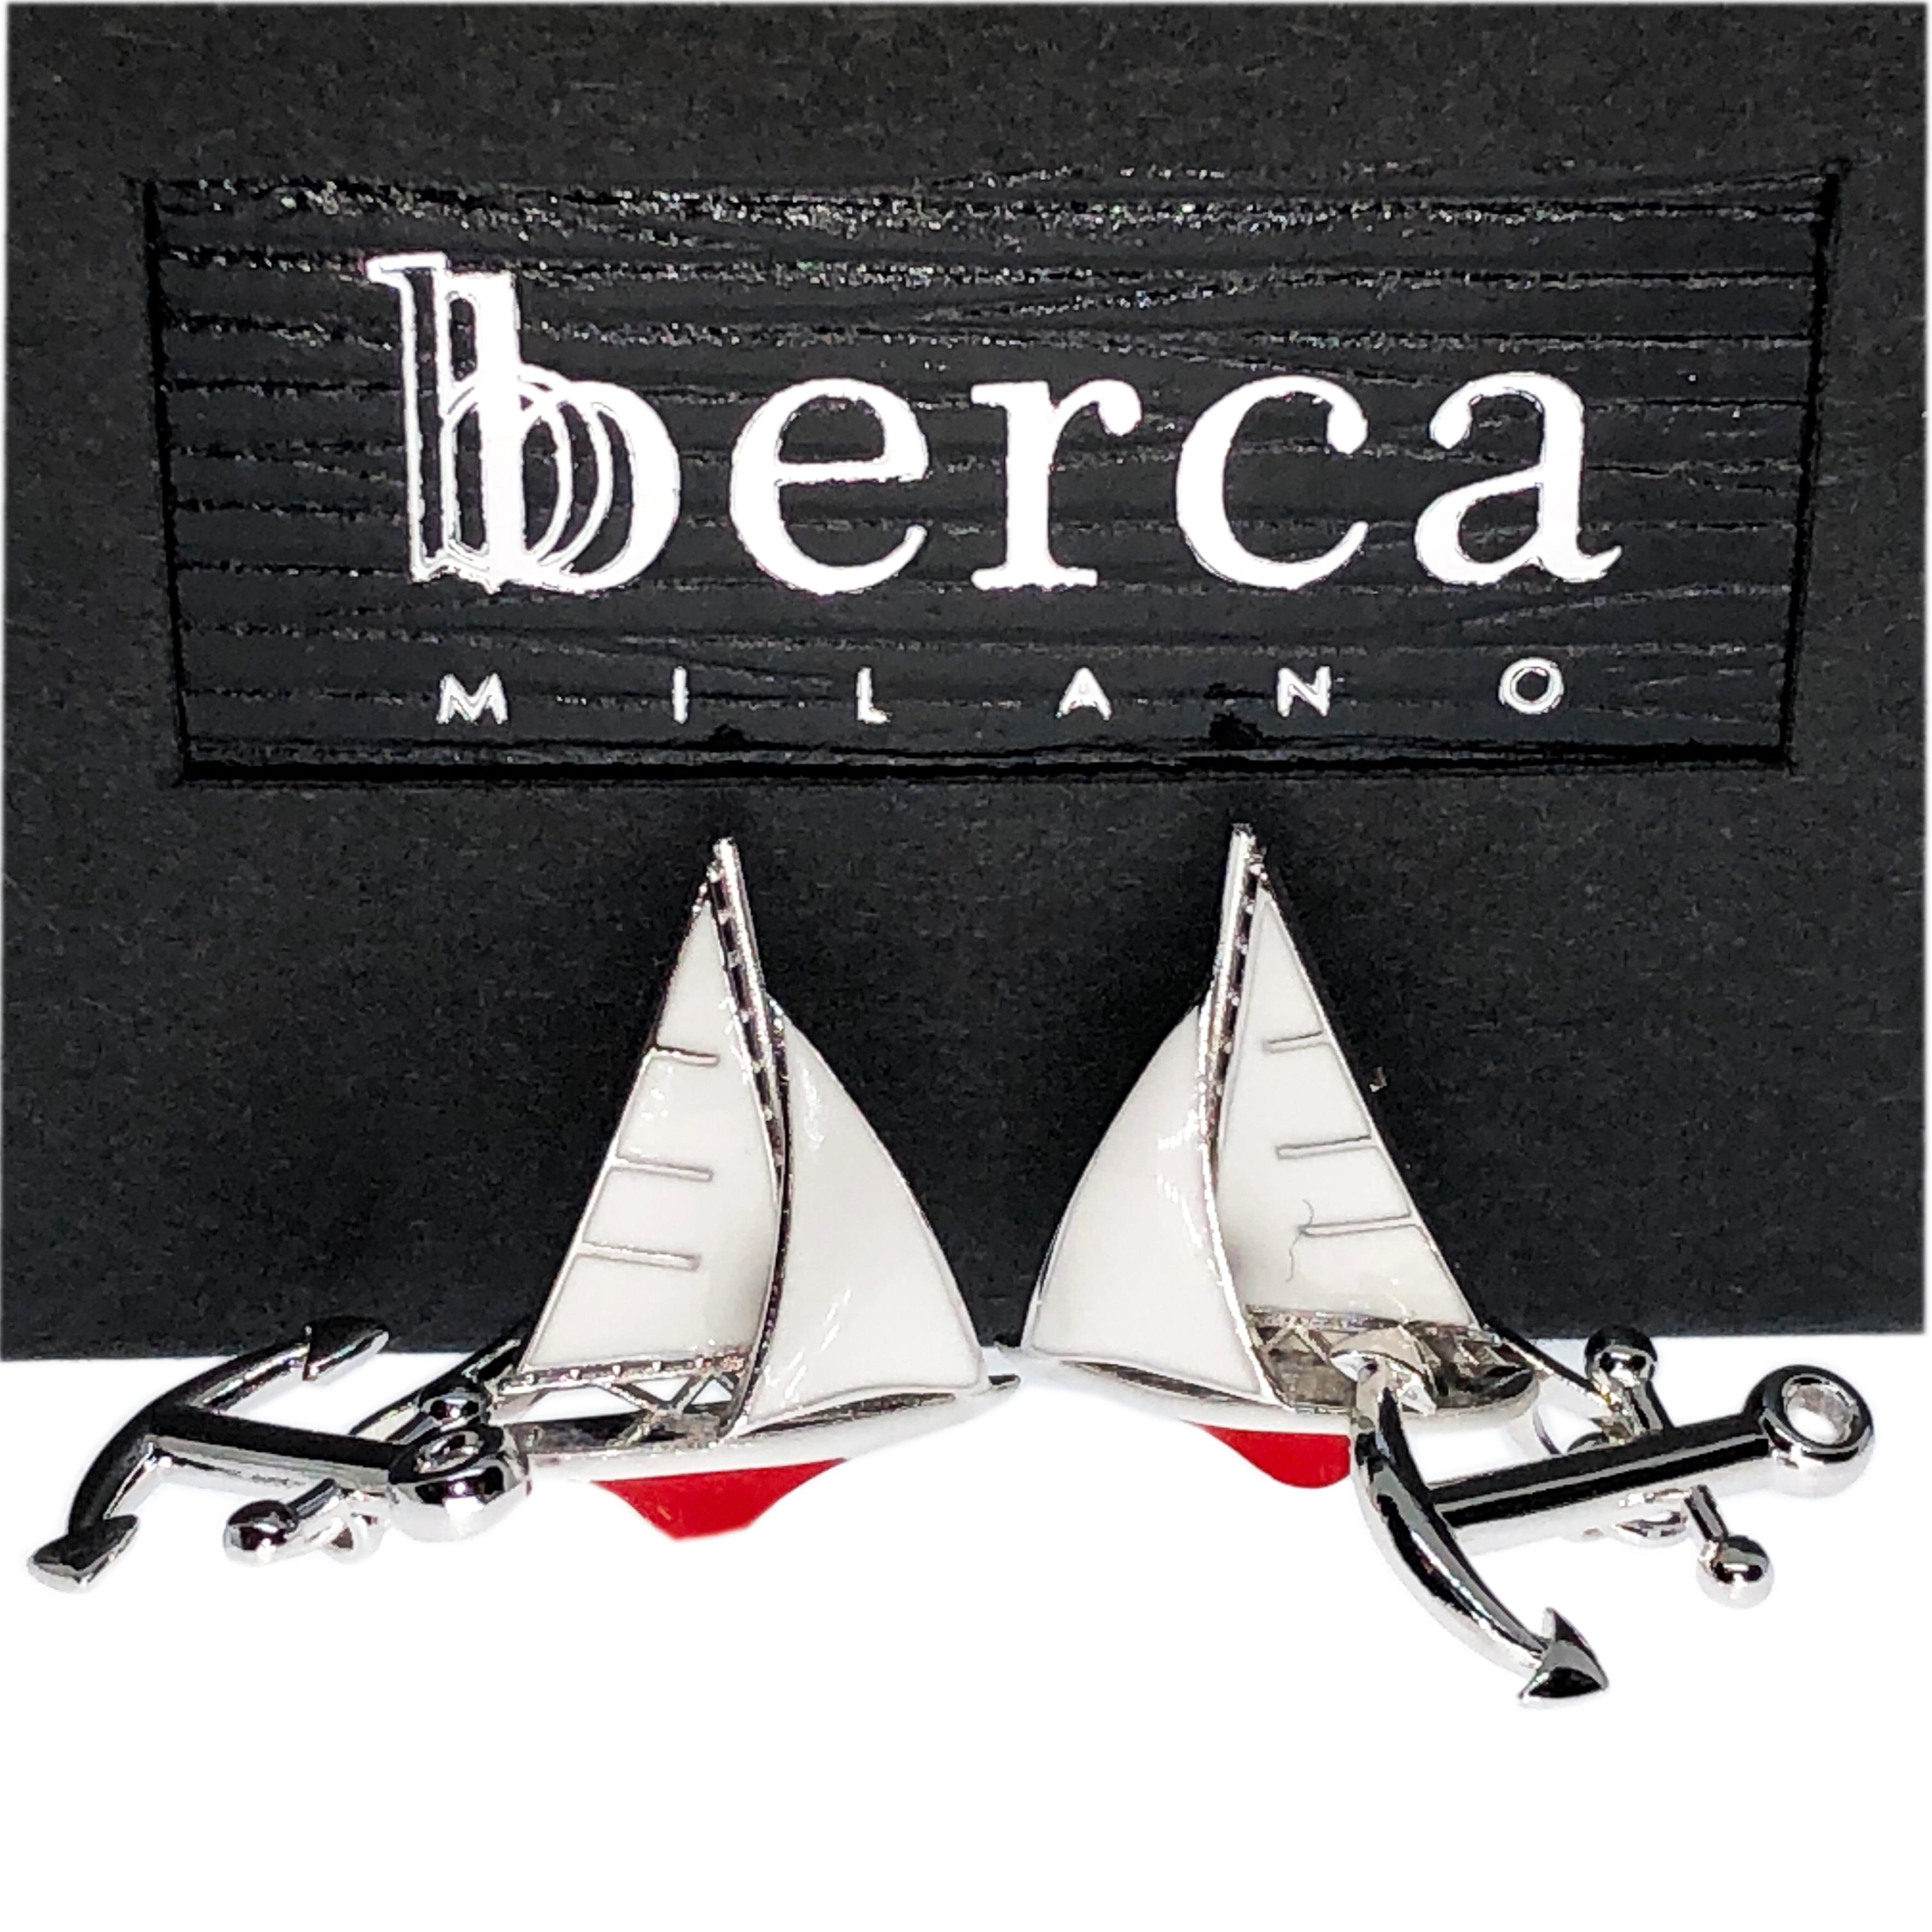 Unique, chic yet timeless, White and Red Hand Enameled Sailing Boat, little anchor back, sterling silver cufflinks.

In our smart fitted tobacco leather case.